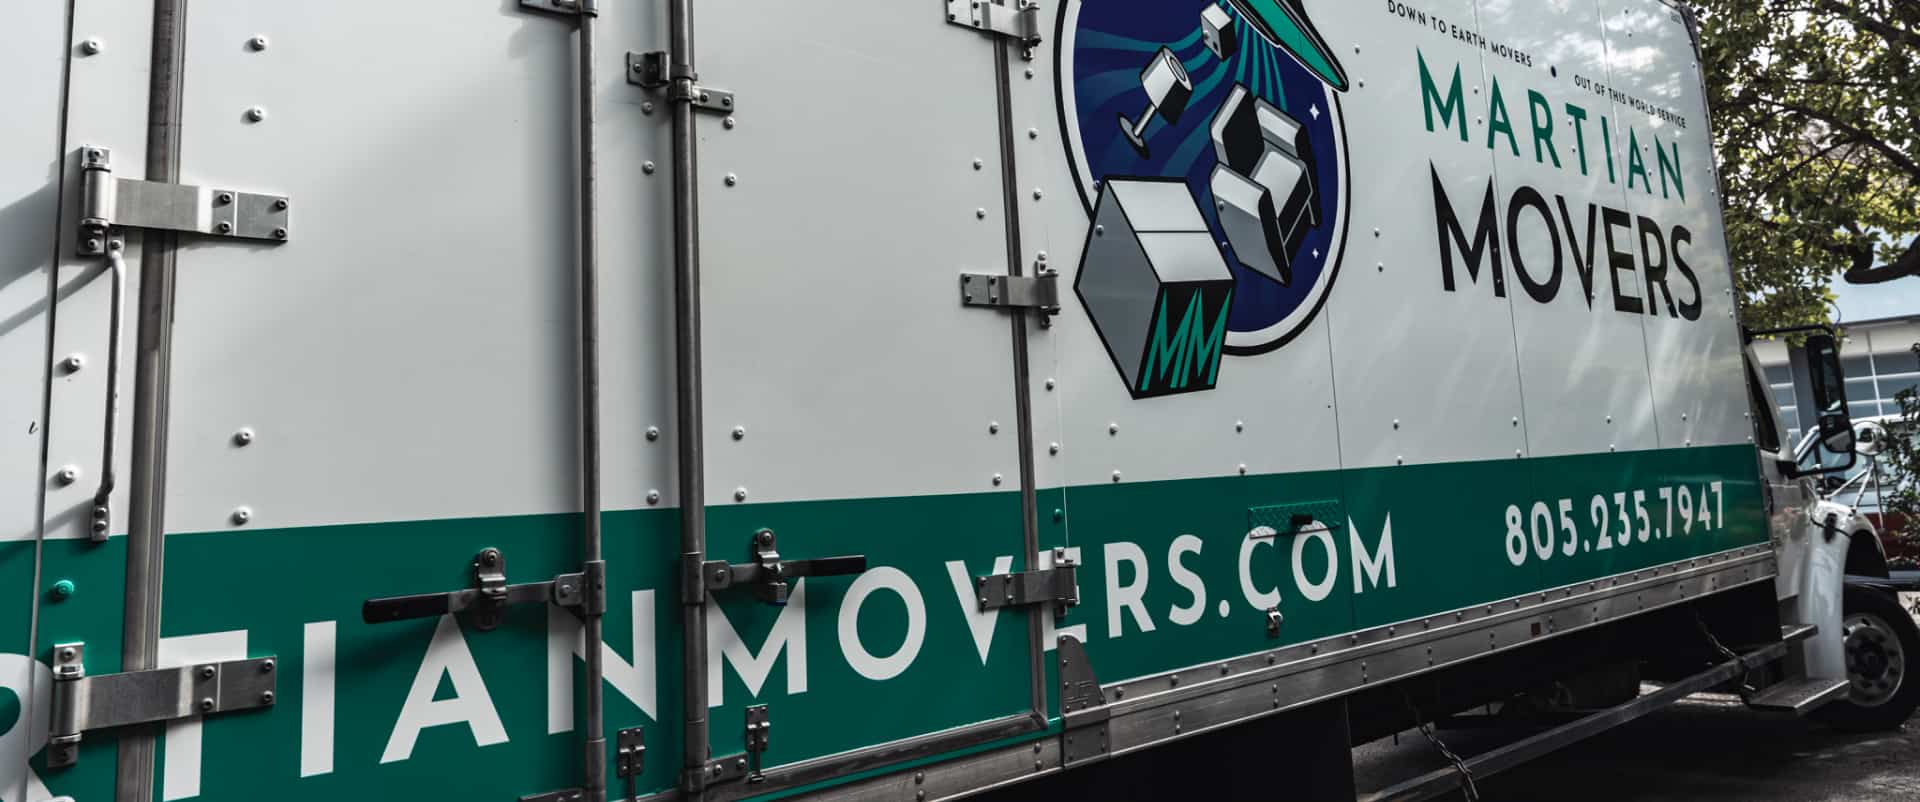 Martian Movers Truck